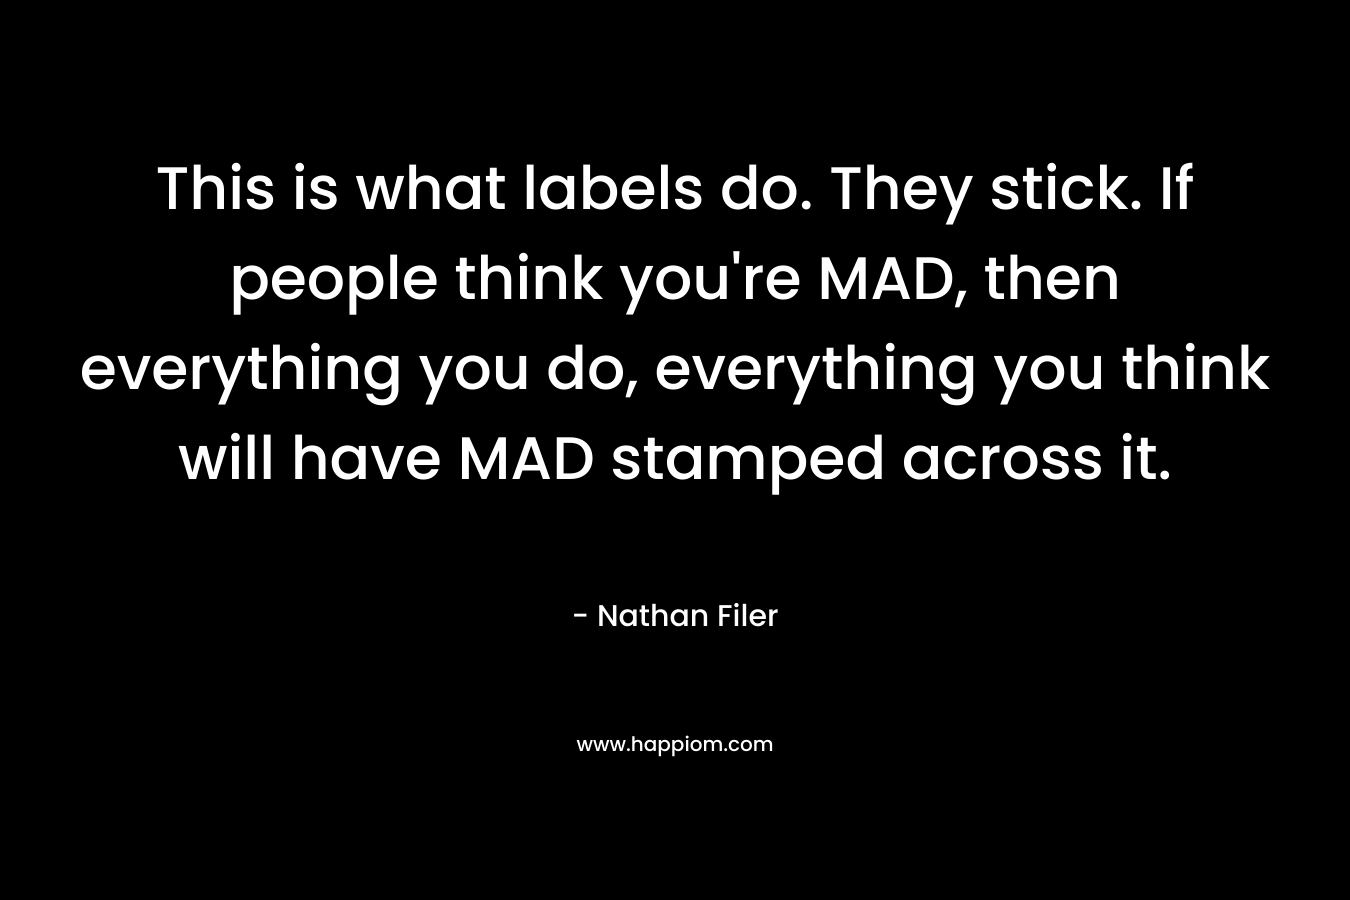 This is what labels do. They stick. If people think you’re MAD, then everything you do, everything you think will have MAD stamped across it. – Nathan Filer